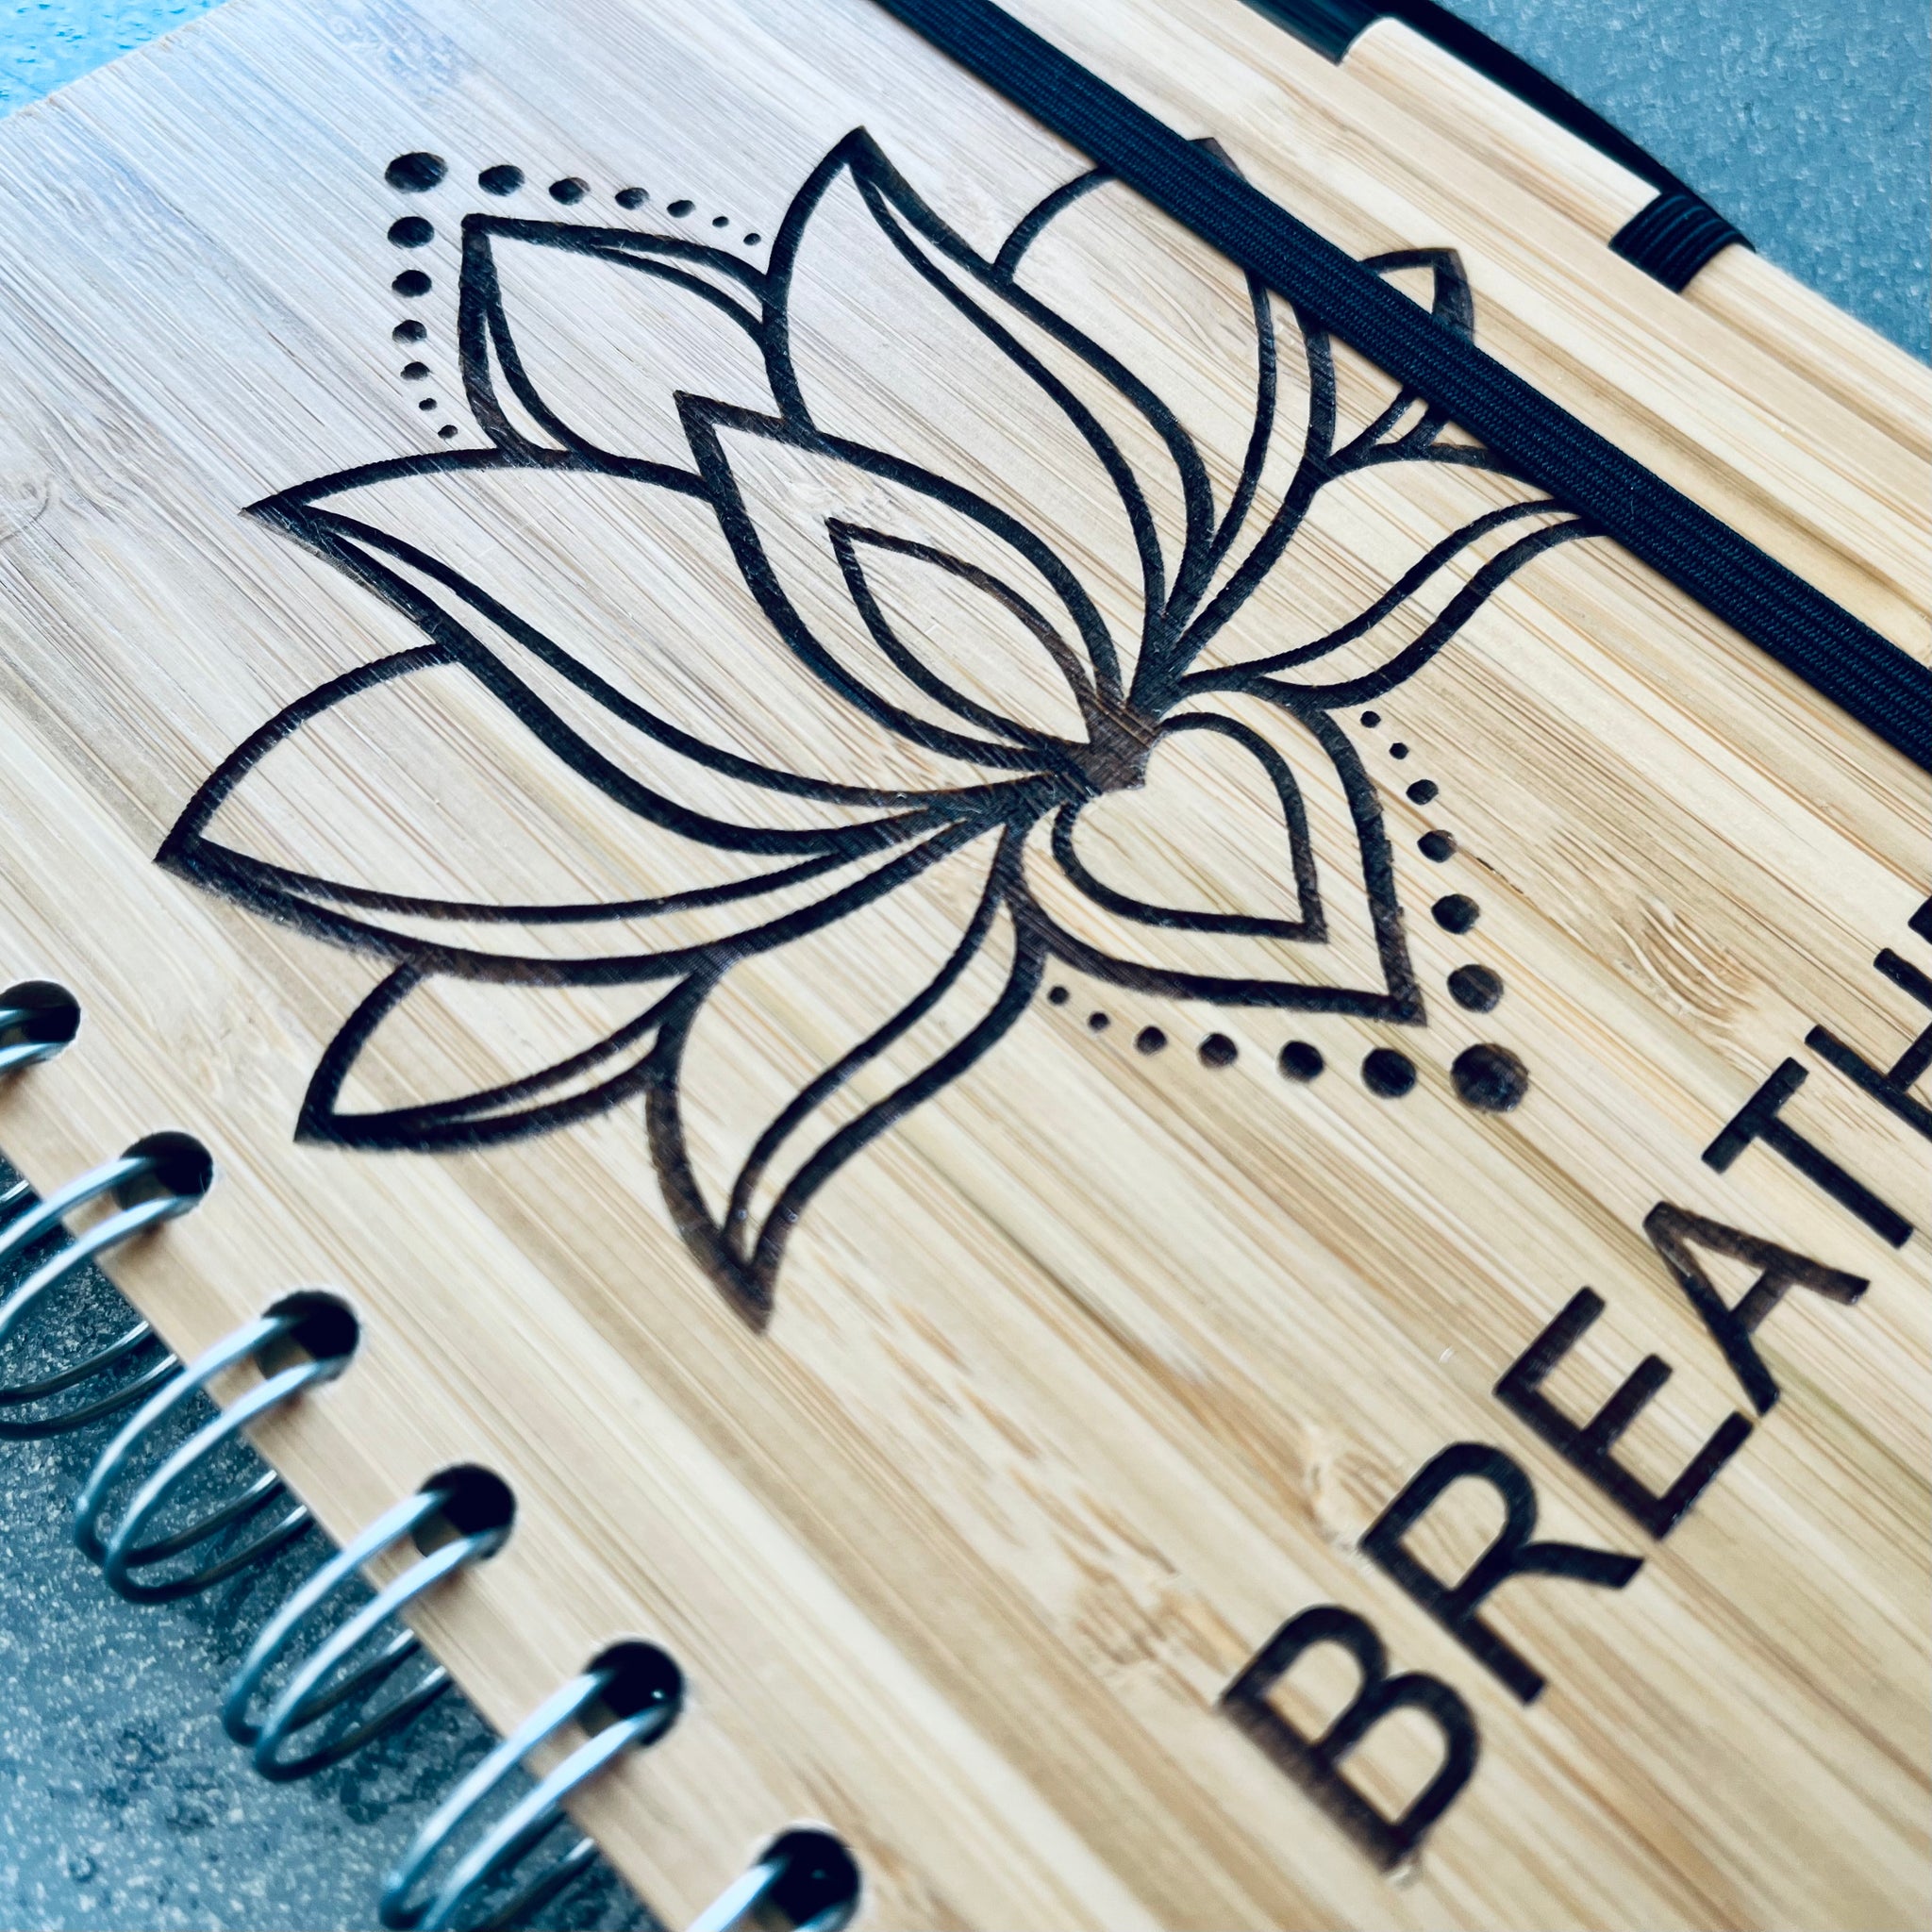 Bamboo Journal with Lotus Inscribed